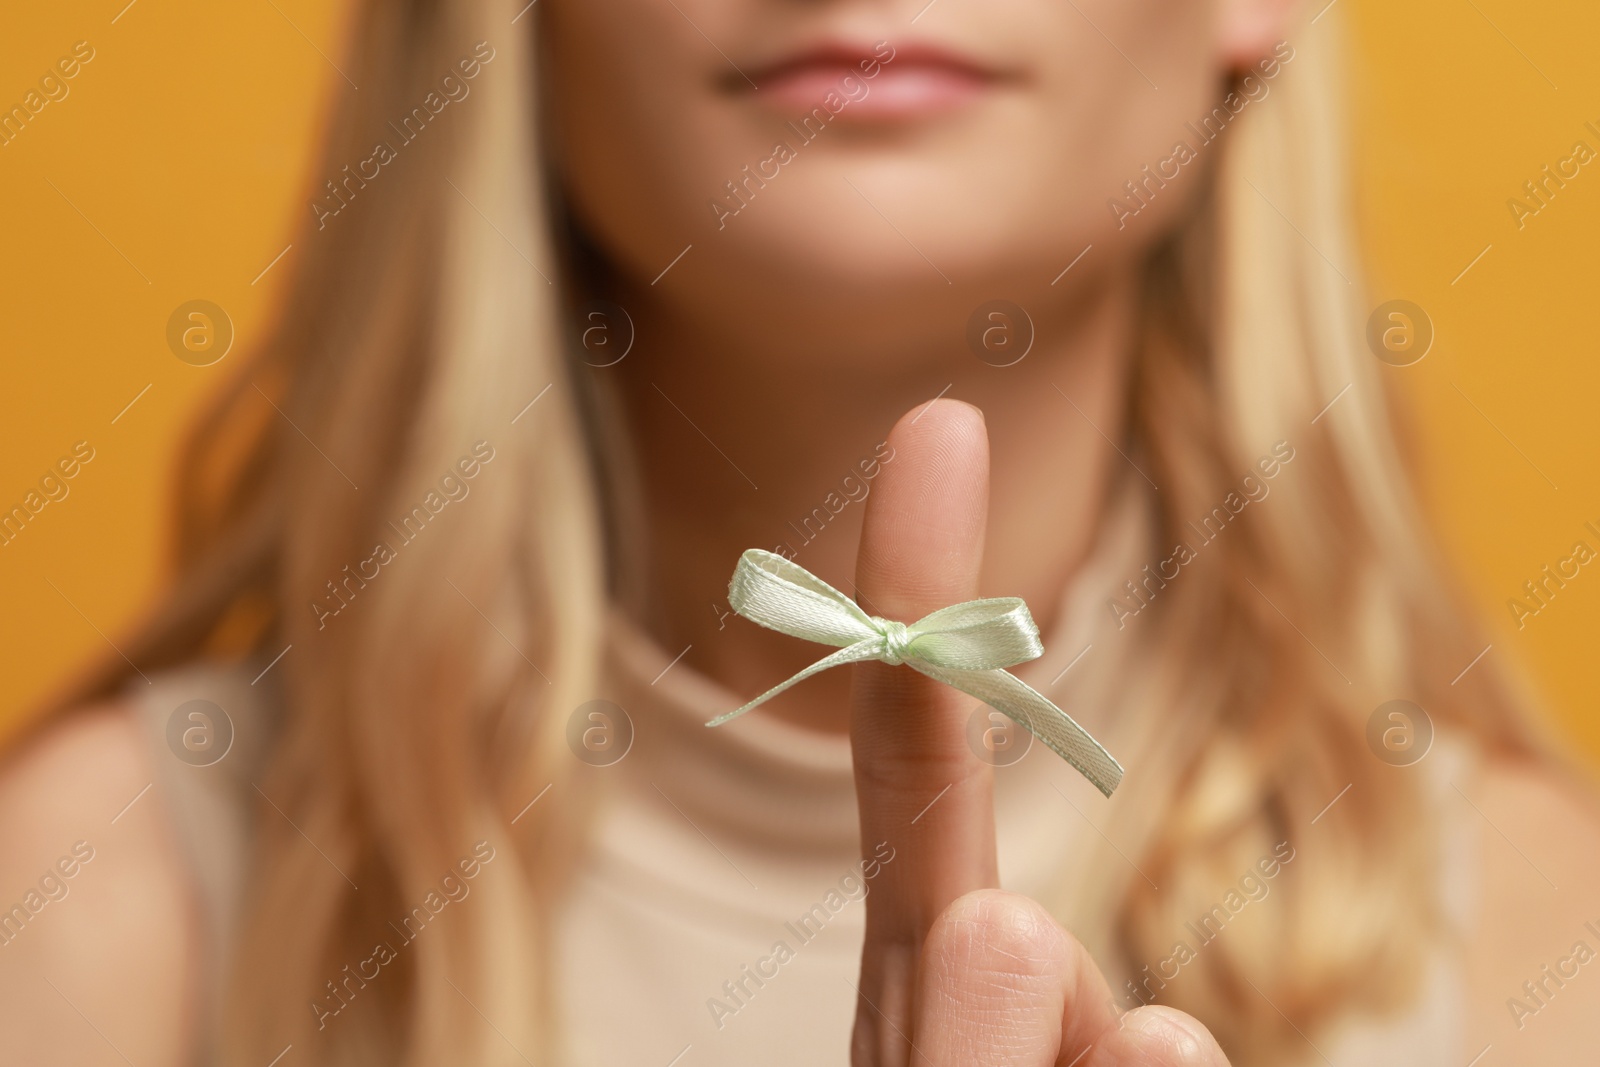 Photo of Woman showing index finger with tied bow as reminder against orange background, focus on hand